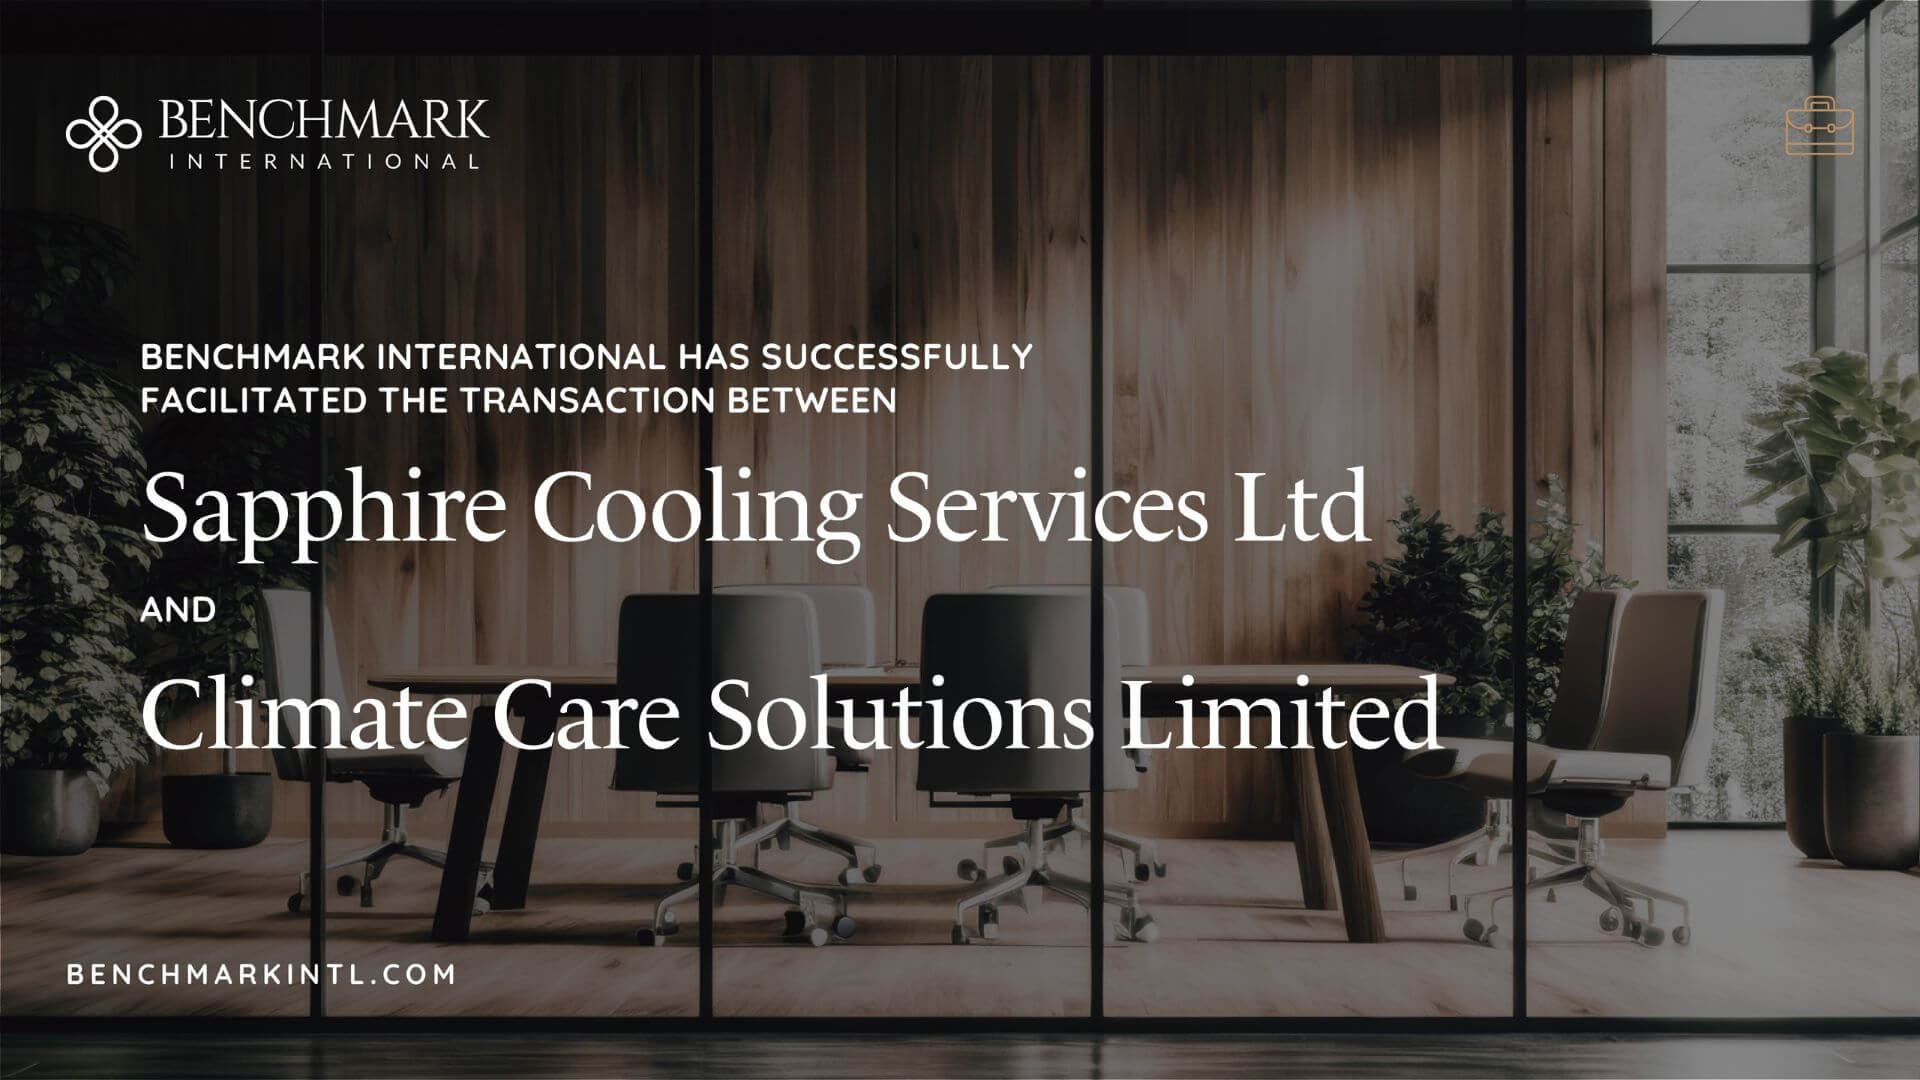 Benchmark International Successfully Facilitated the Transaction Between Sapphire Cooling Services Ltd and Climate Care Solutions Limited